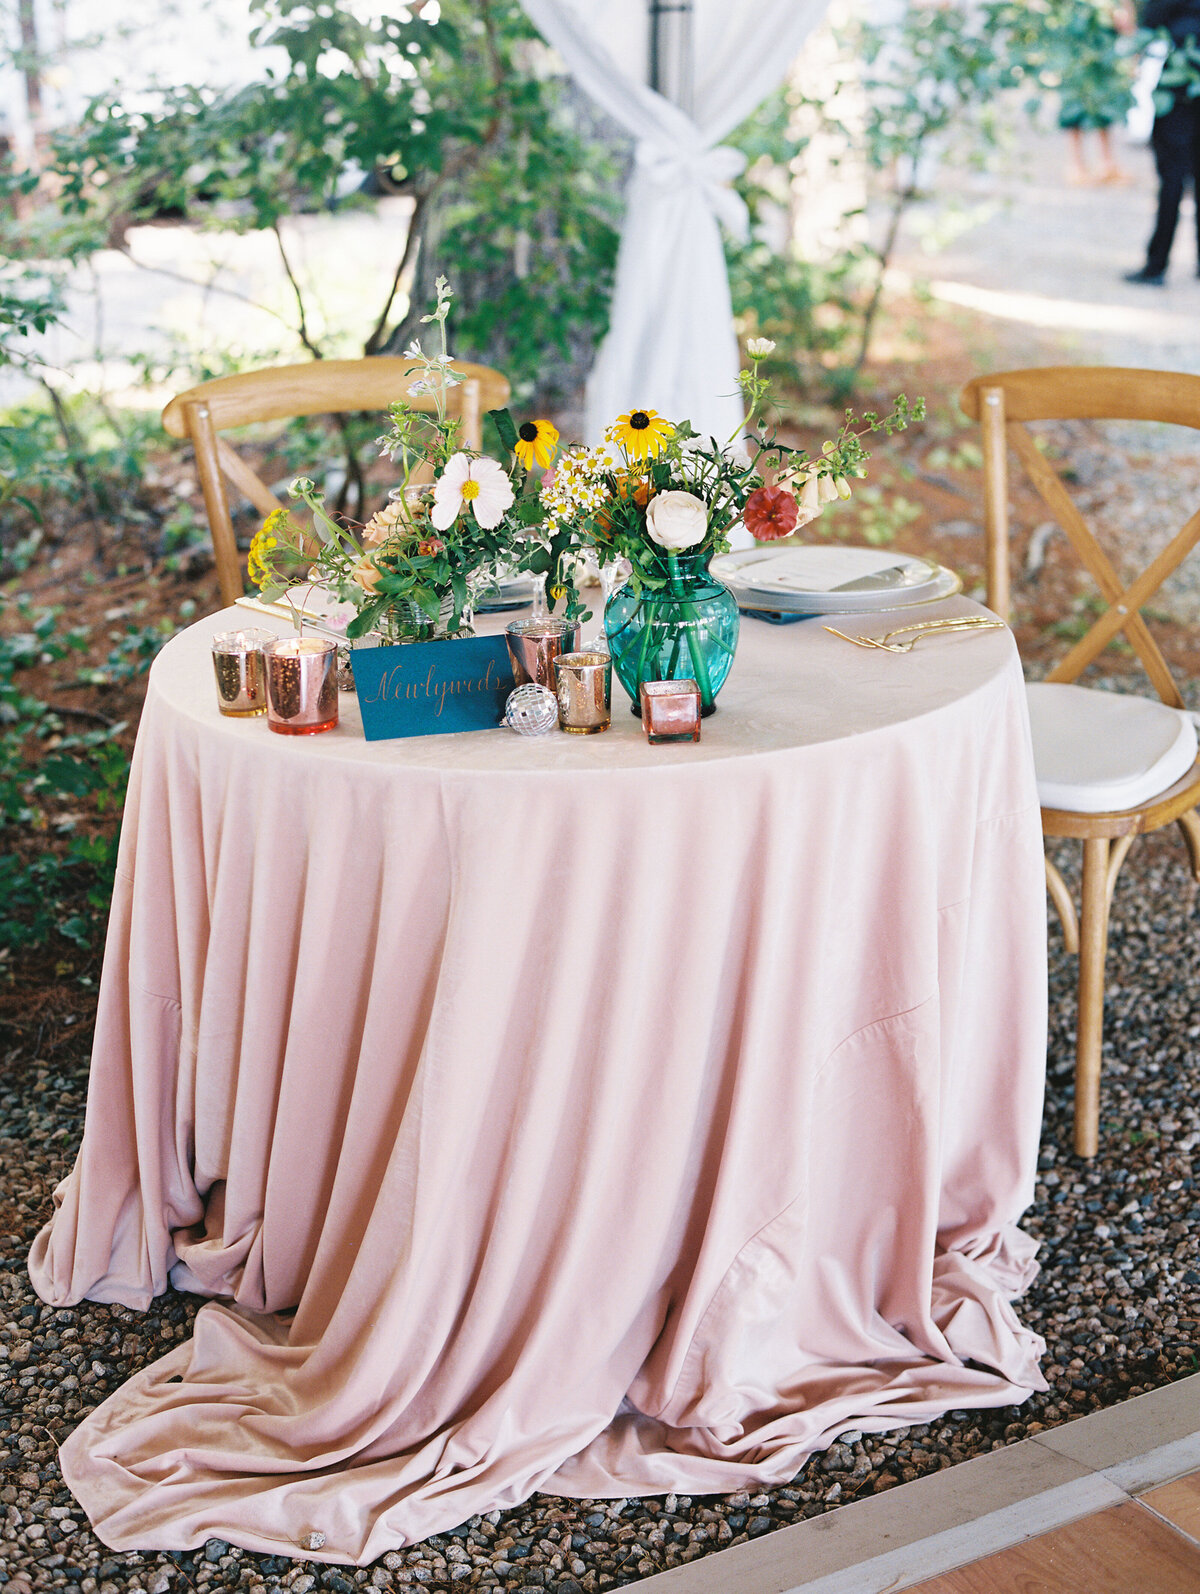 A colorful private lakeside wedding in New Hampshire